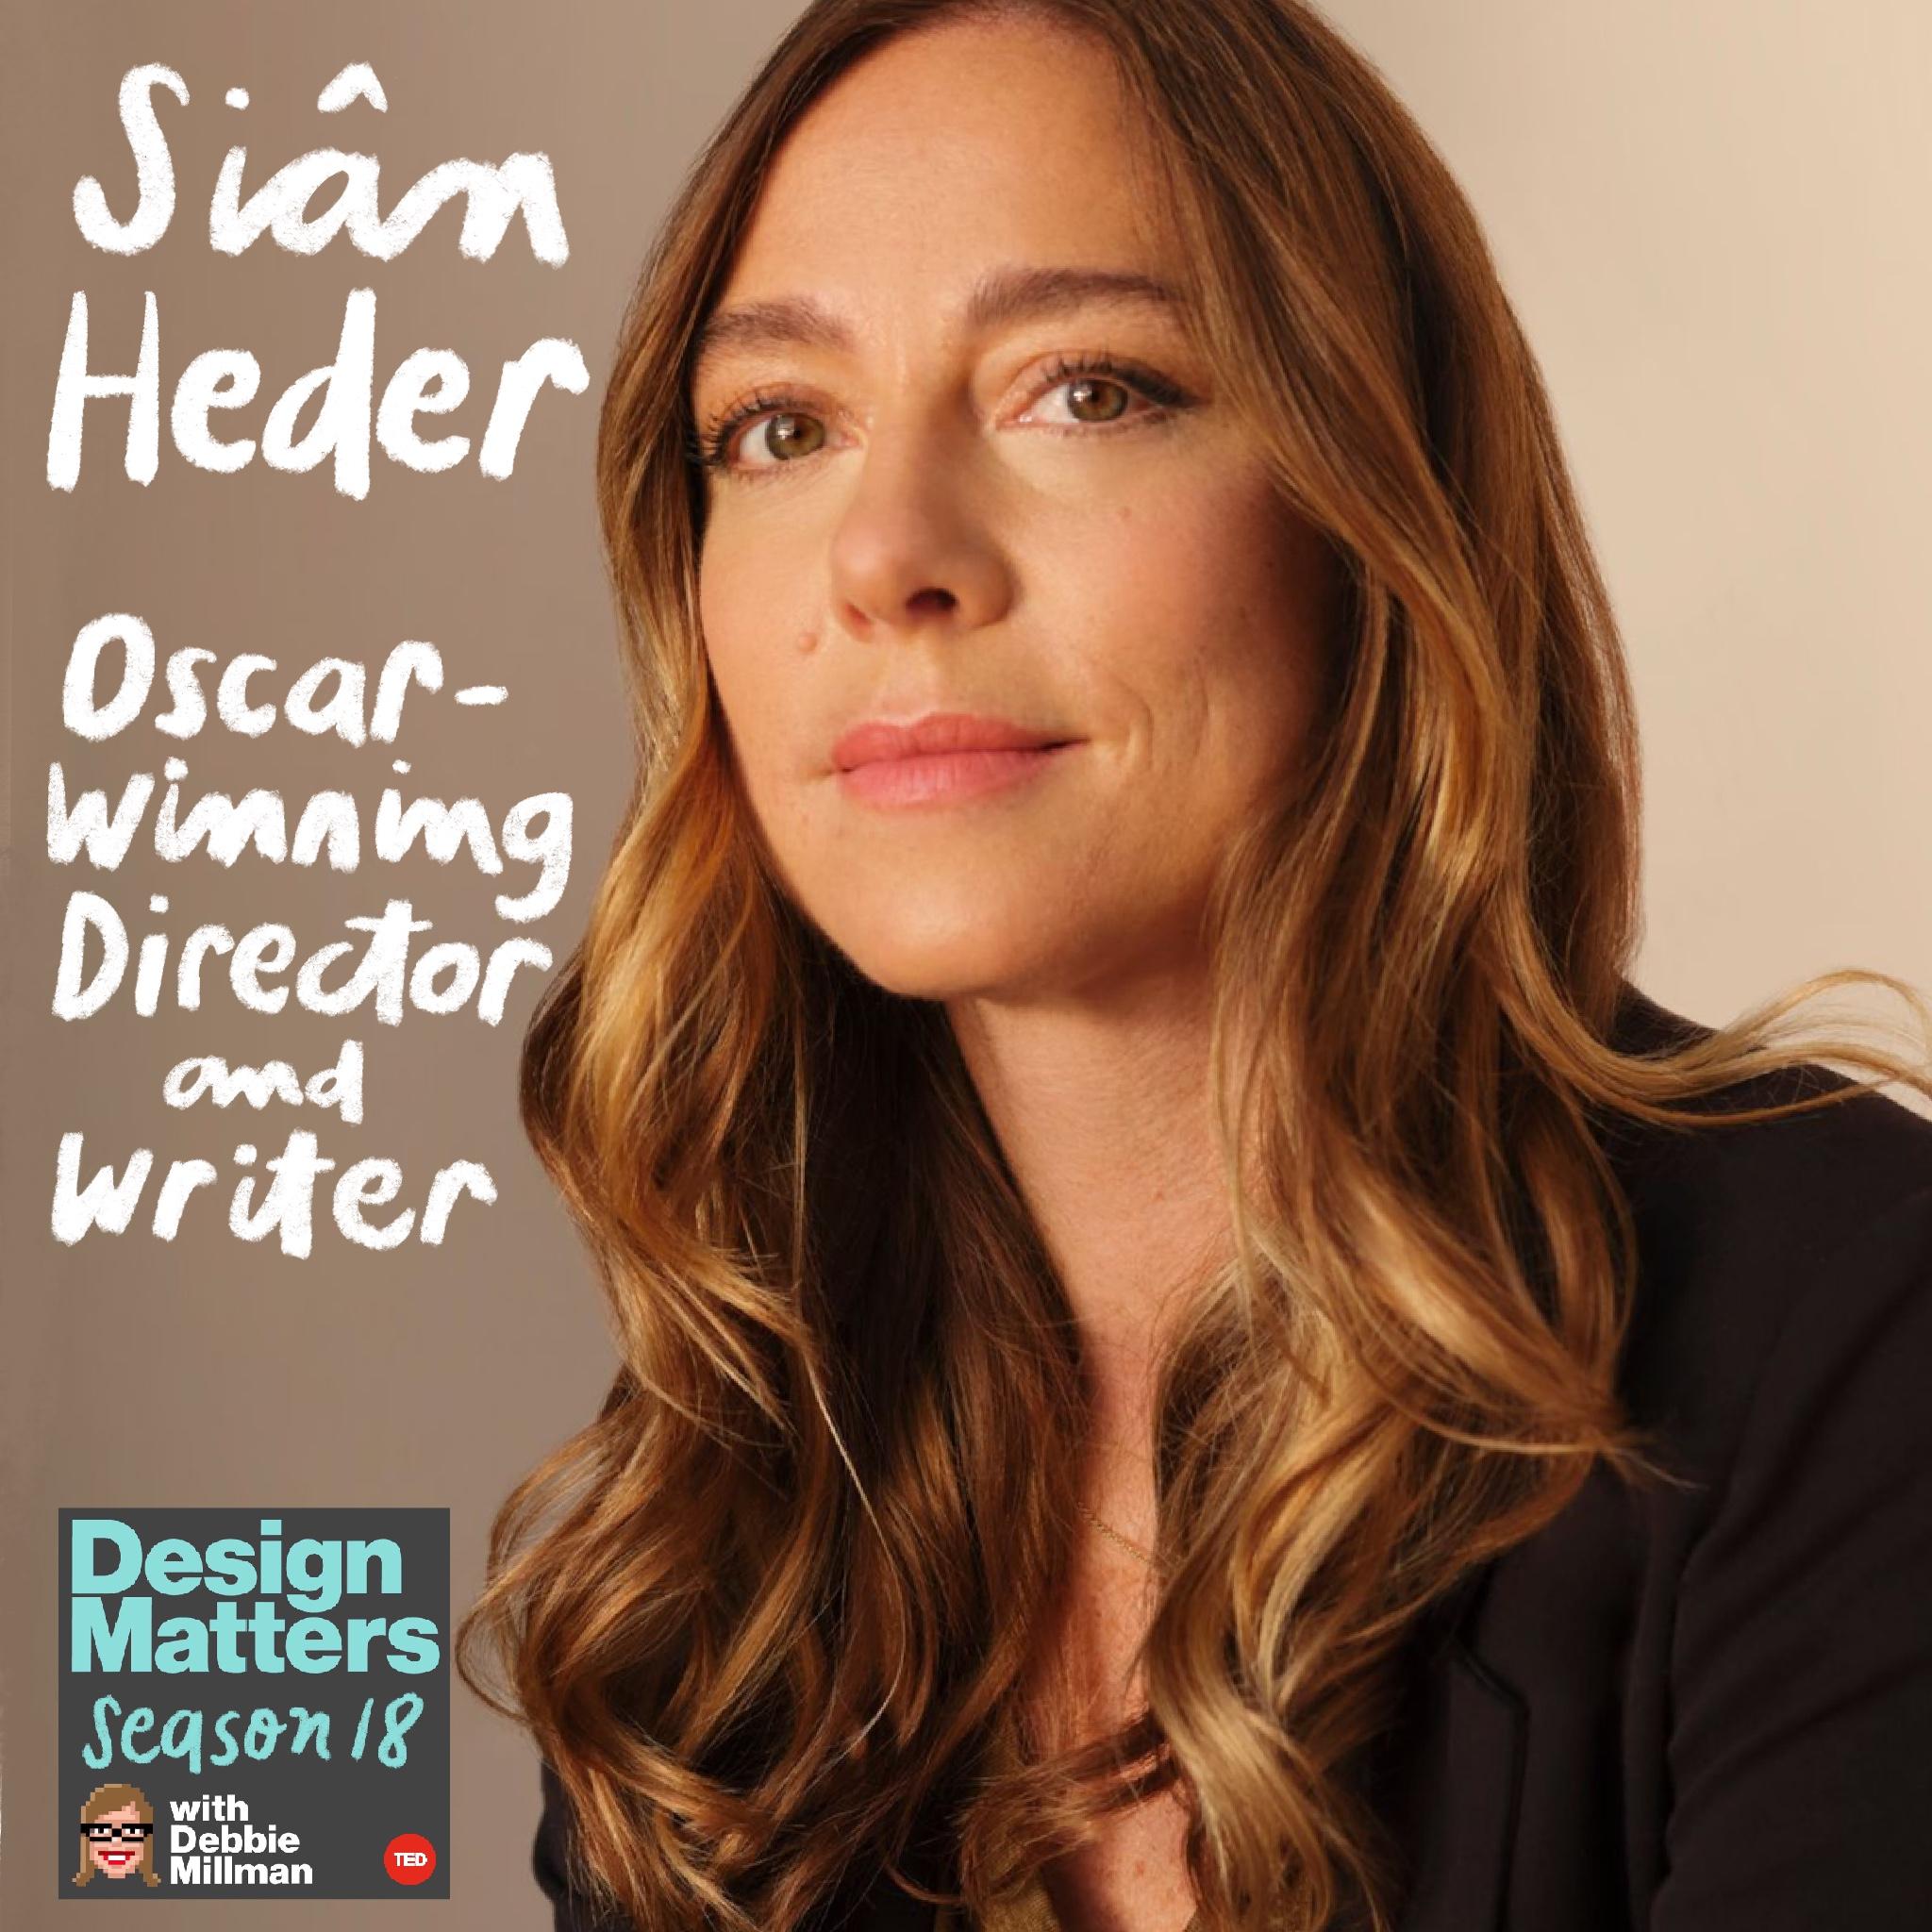 Thumbnail for "Siân Heder ".